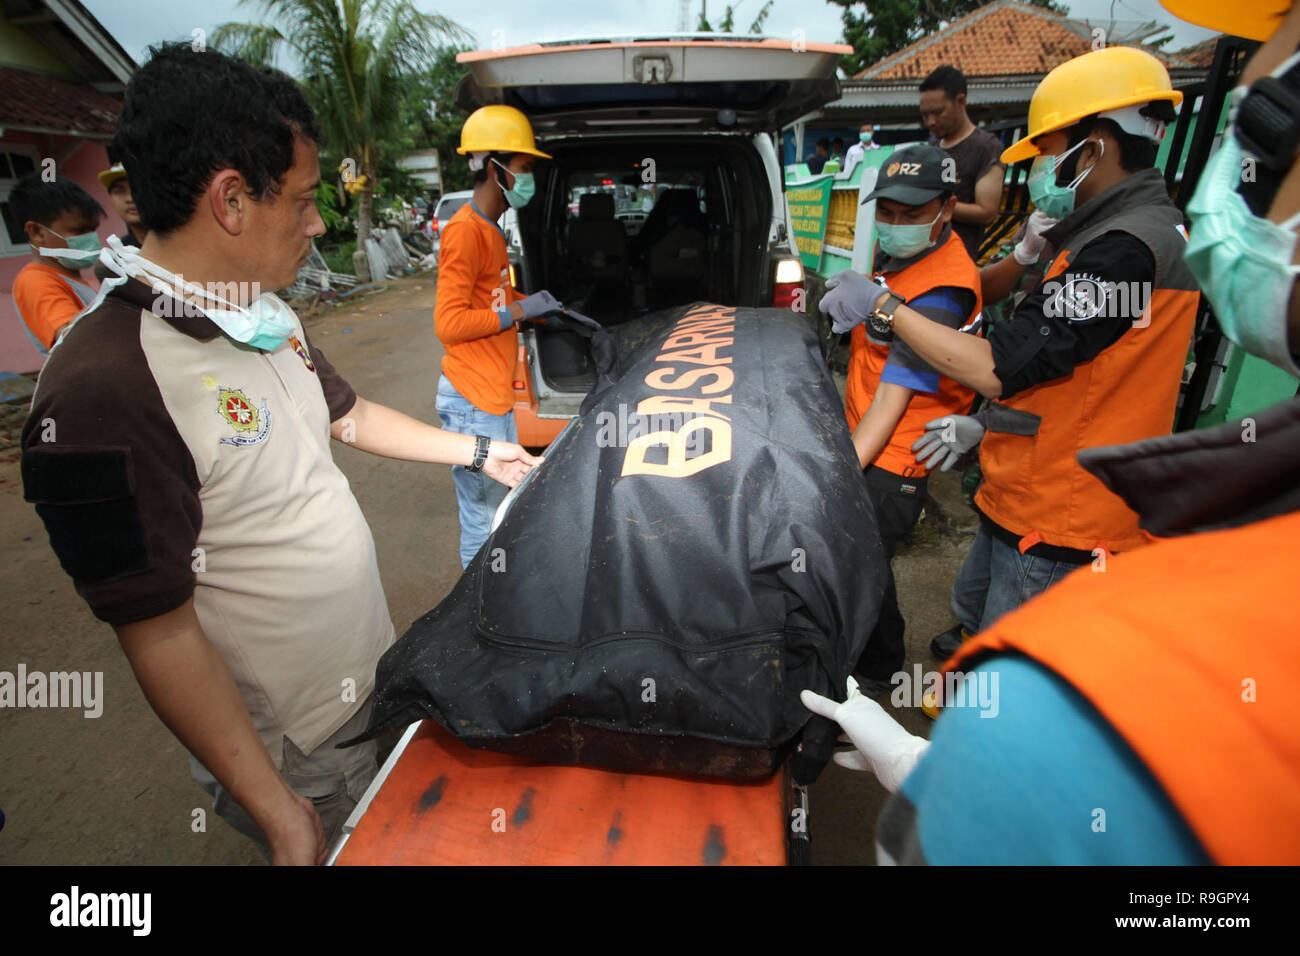 South Lampung, Lampung, Indonesia. 25th Dec, 2018. LAMPUNG, INDONESIA - DECEMBER 25 : Rescue team bring tsunami victim body after the tsunami hit at South Lampung on Decemebr 25, 2018 in Pandegralang regency, Banten Province, Indonesia.A tsunami struck Indonesia's Sunda Strait, the expanse between the islands of Java and Sumatra, on the night of December 22, local time. Credit: ZUMA Press, Inc./Alamy Live News Stock Photo